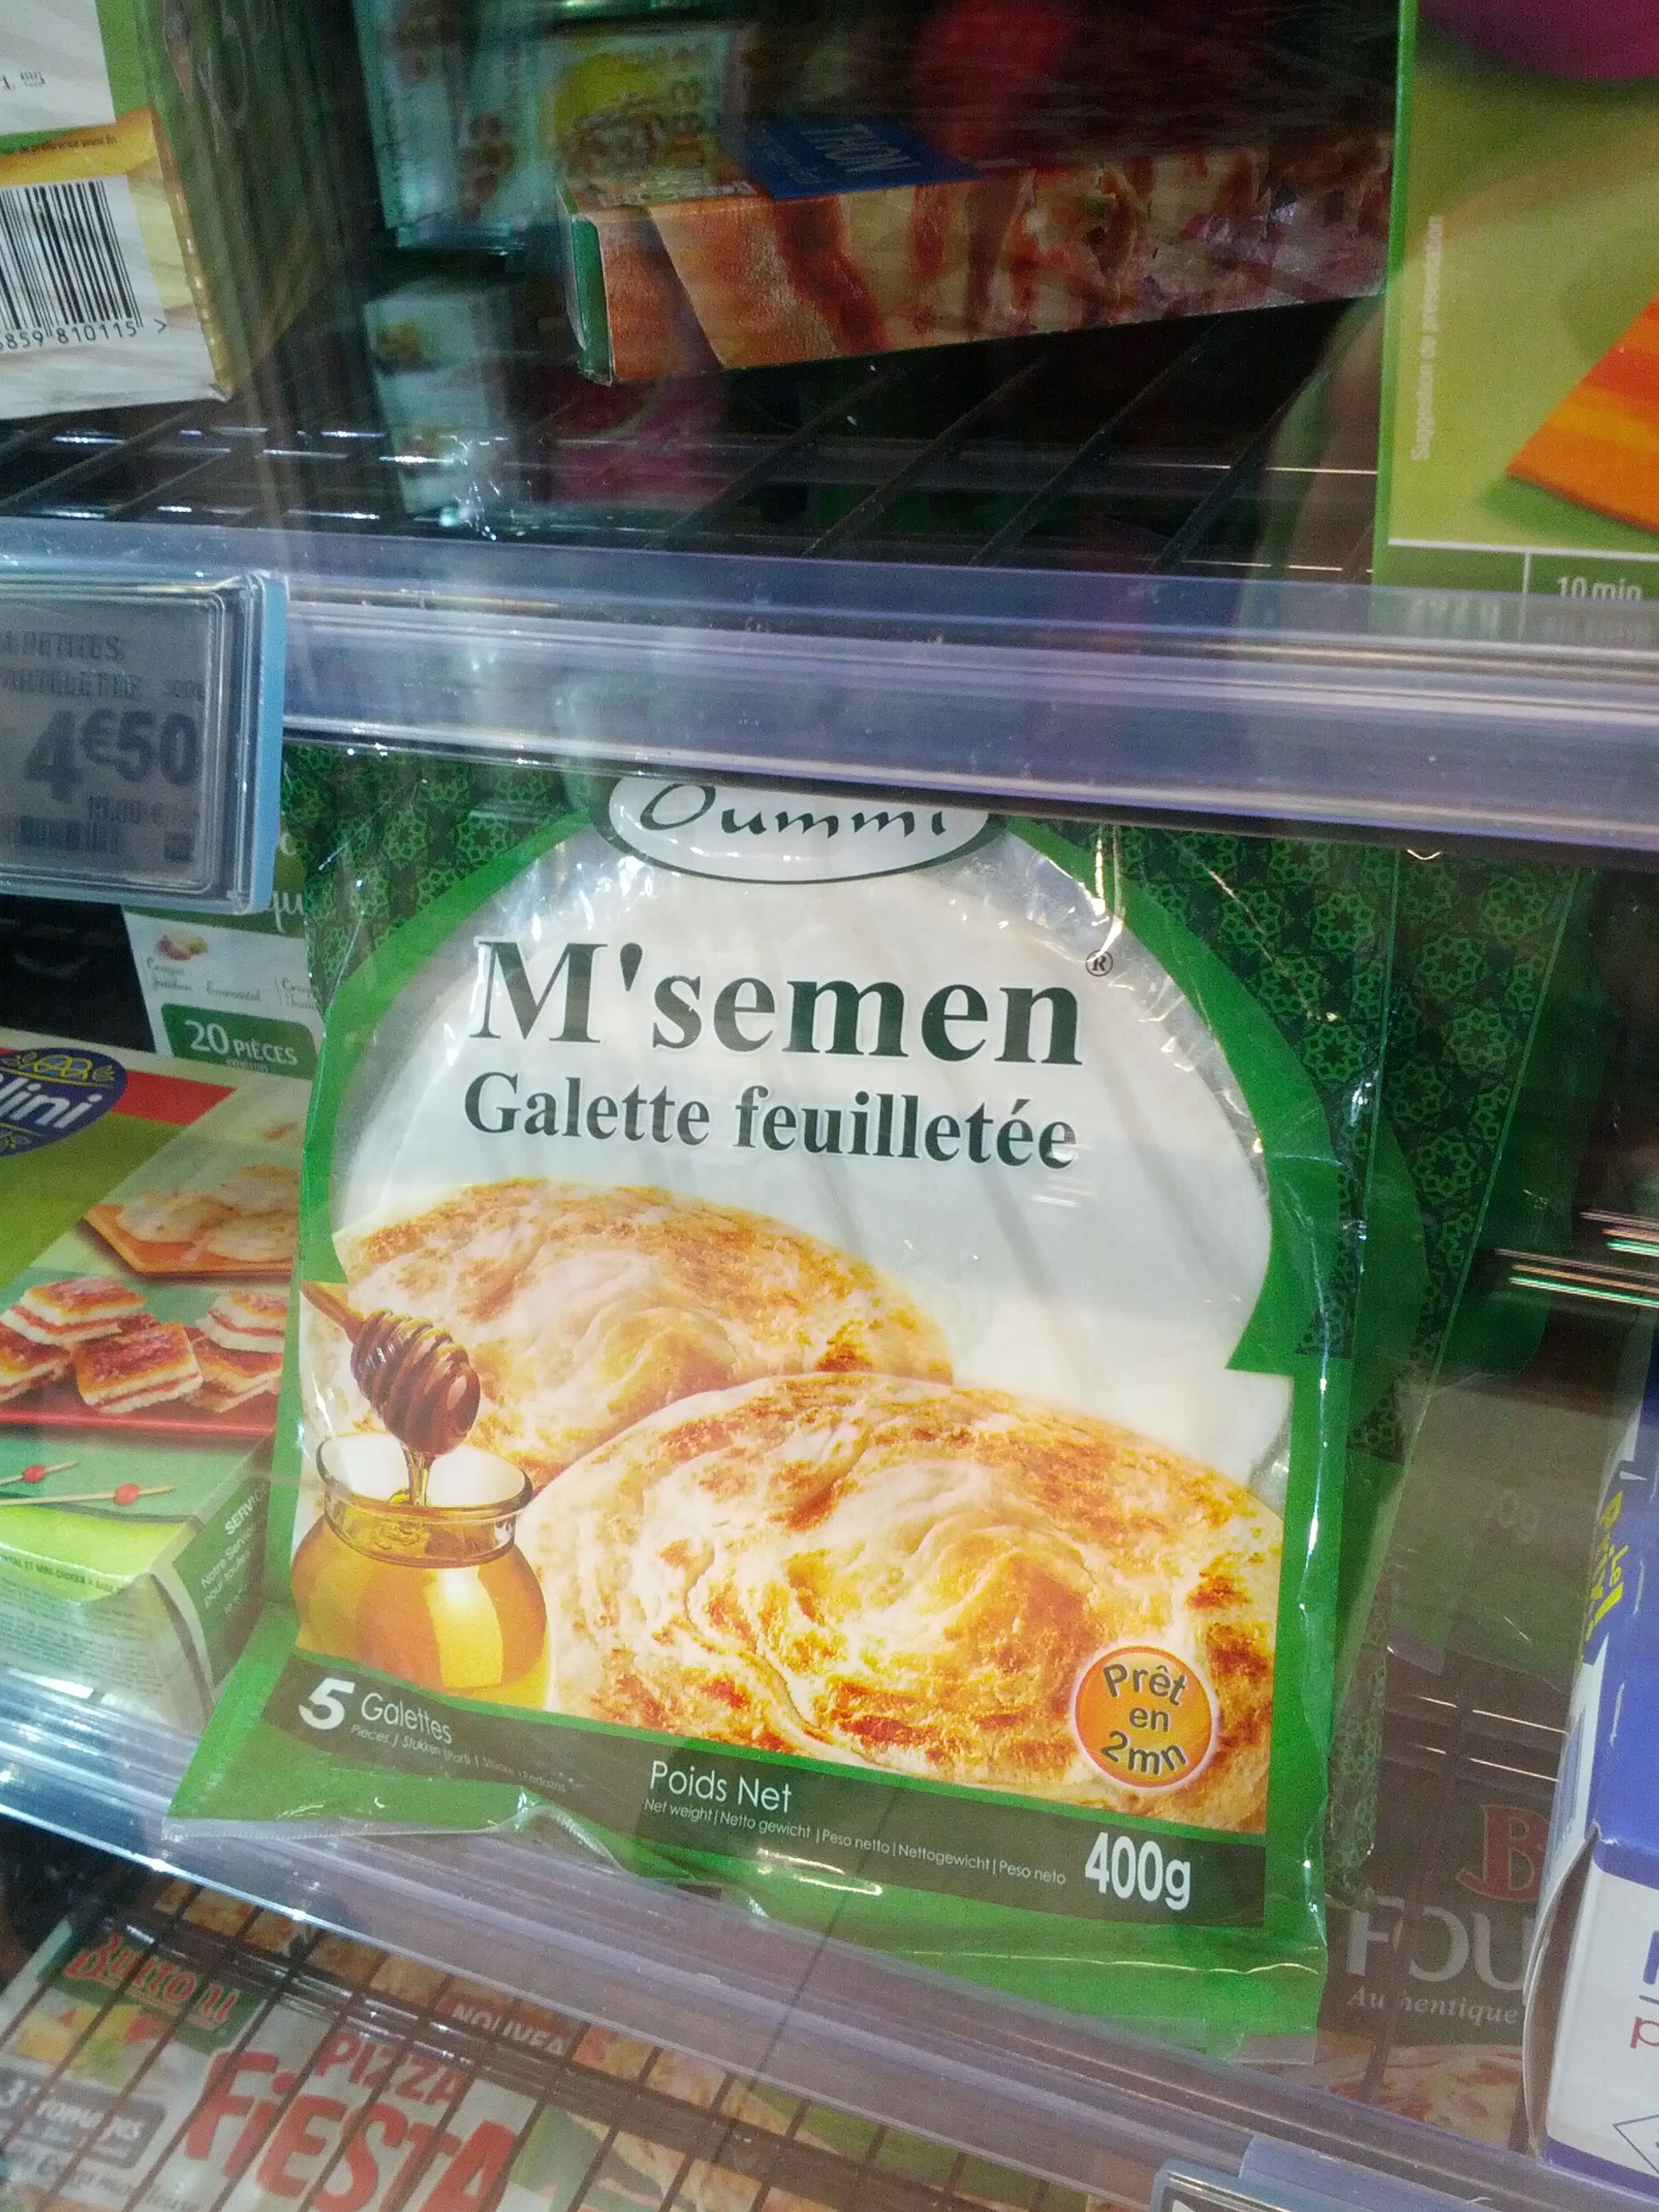 Pardon me, m'lady. May I interest you in ...